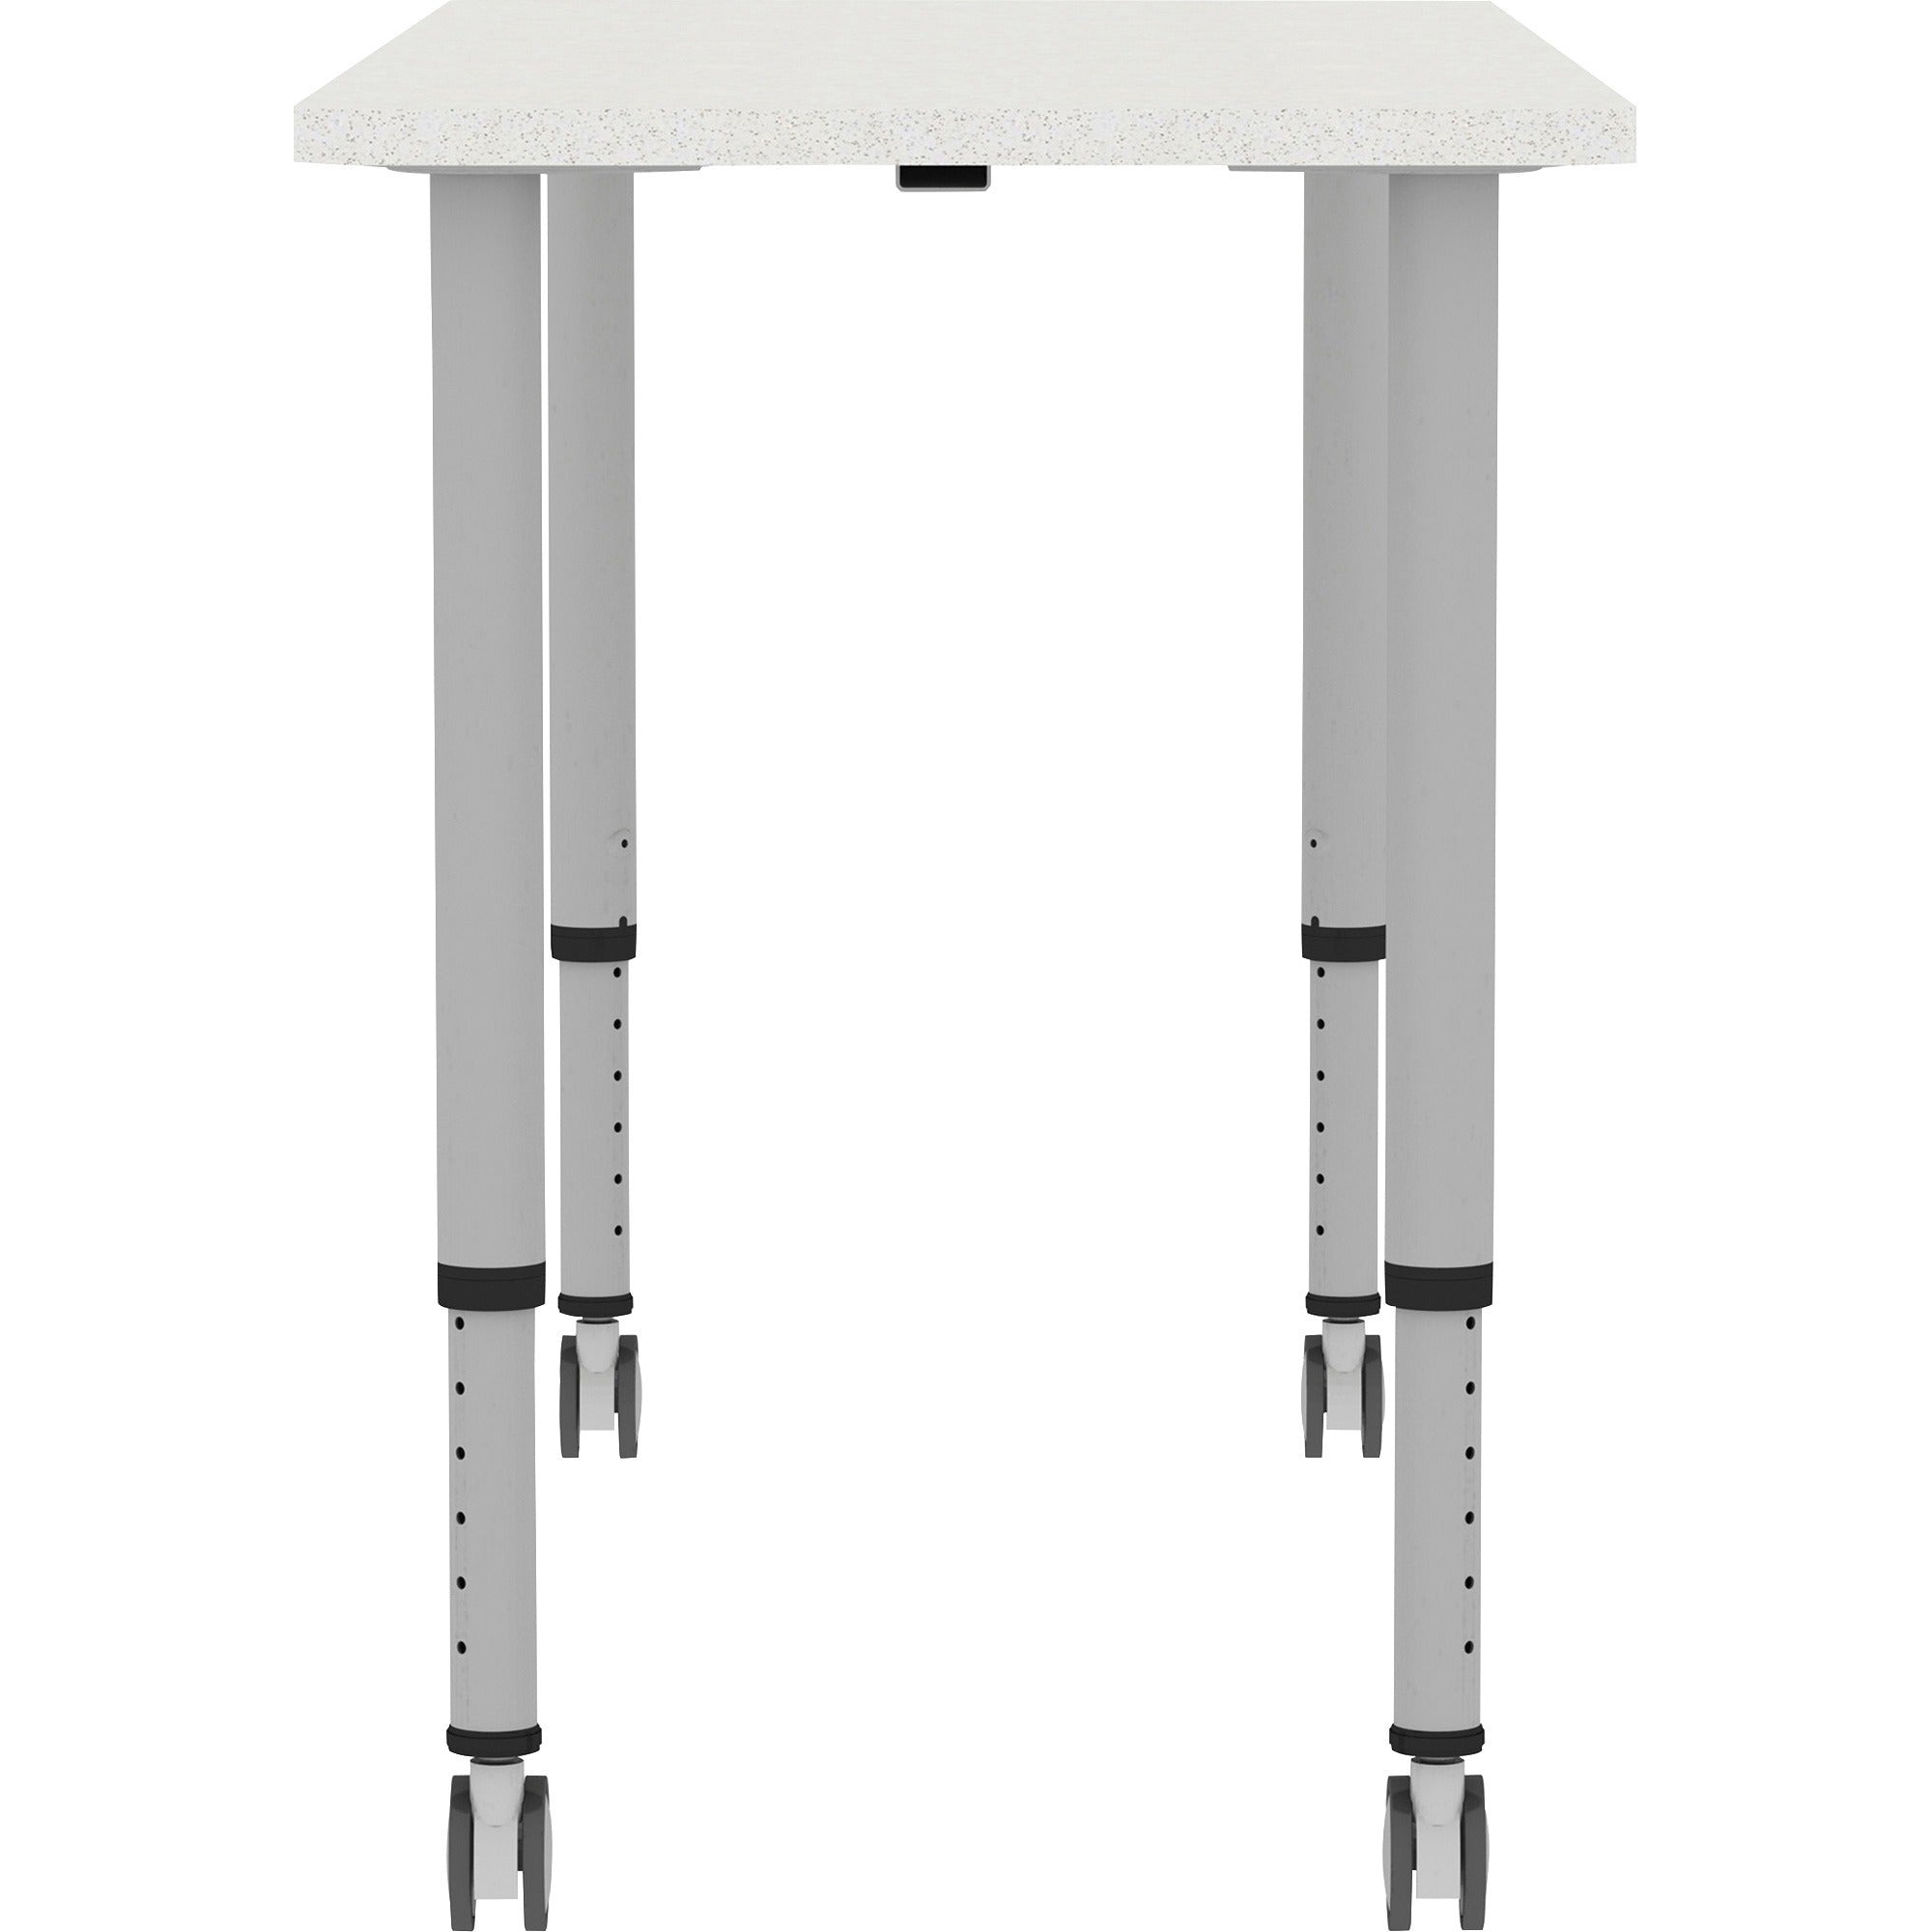 lorell-attune-height-adjustable-multipurpose-rectangular-table-for-table-toprectangle-top-adjustable-height-2662-to-3362-adjustment-x-60-table-top-width-x-2362-table-top-depth-3362-height-assembly-required-laminated-gray-lam_llr69579 - 4